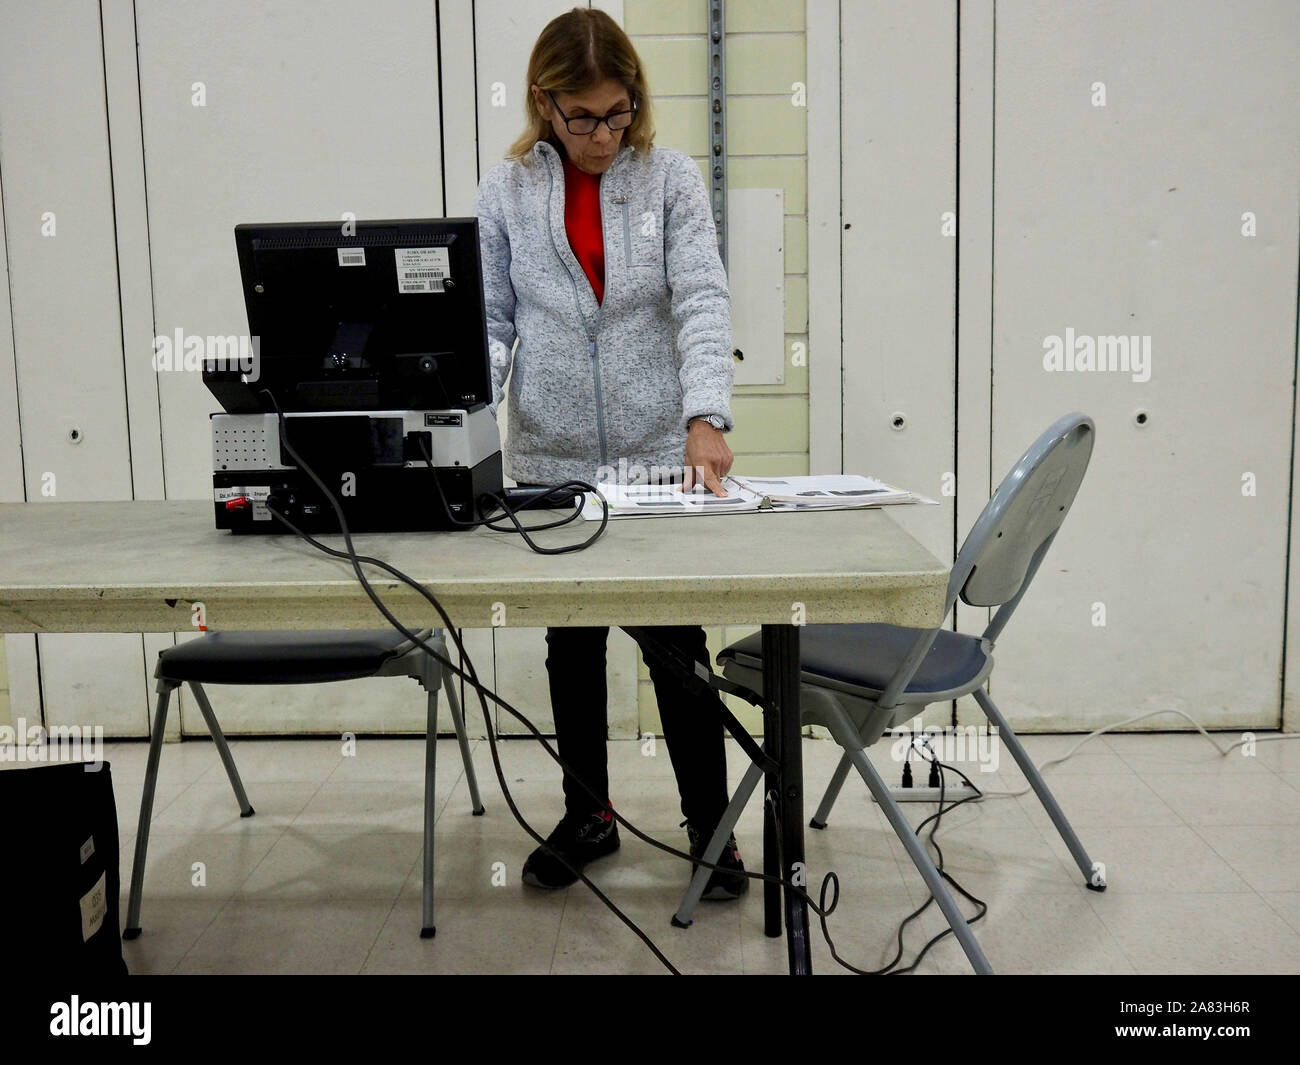 Virginia, USA. 5th Nov, 2019. Poll worker finalizes paperwork after polls close on Election Day, November 5, 2019 Credit: Sue Dorfman/ZUMA Wire/Alamy Live News Stock Photo